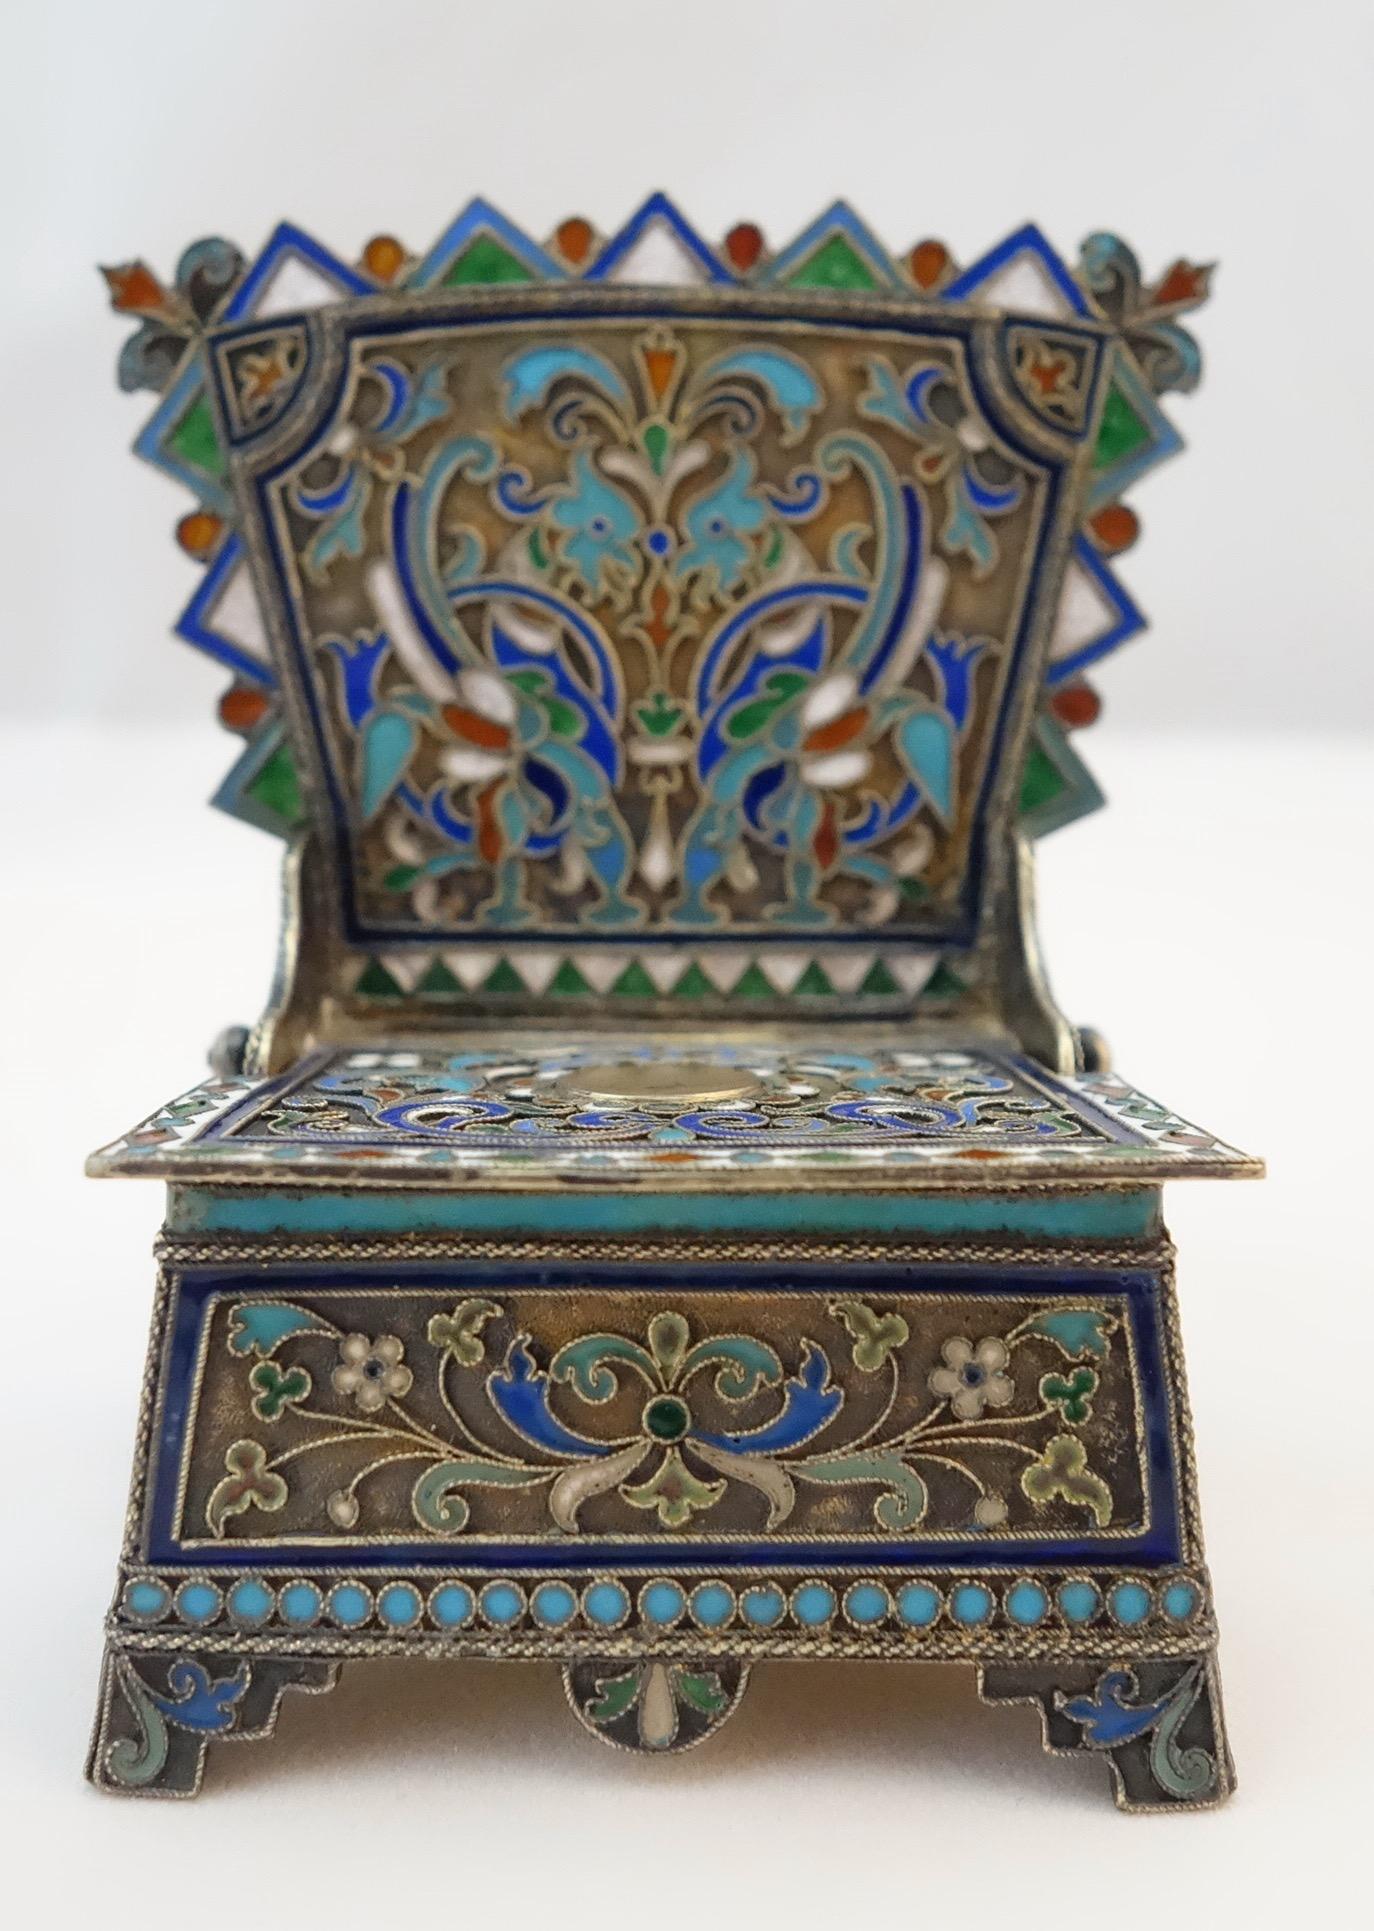 Russian silver enamel salt throne Moscow, circa 1888. Beautiful multicolored enamel throughout the surface, and gold wash on the inside. The throne is marked on the bottom and under the cover for Ivan Saltykov maker, and is of the period.
The item